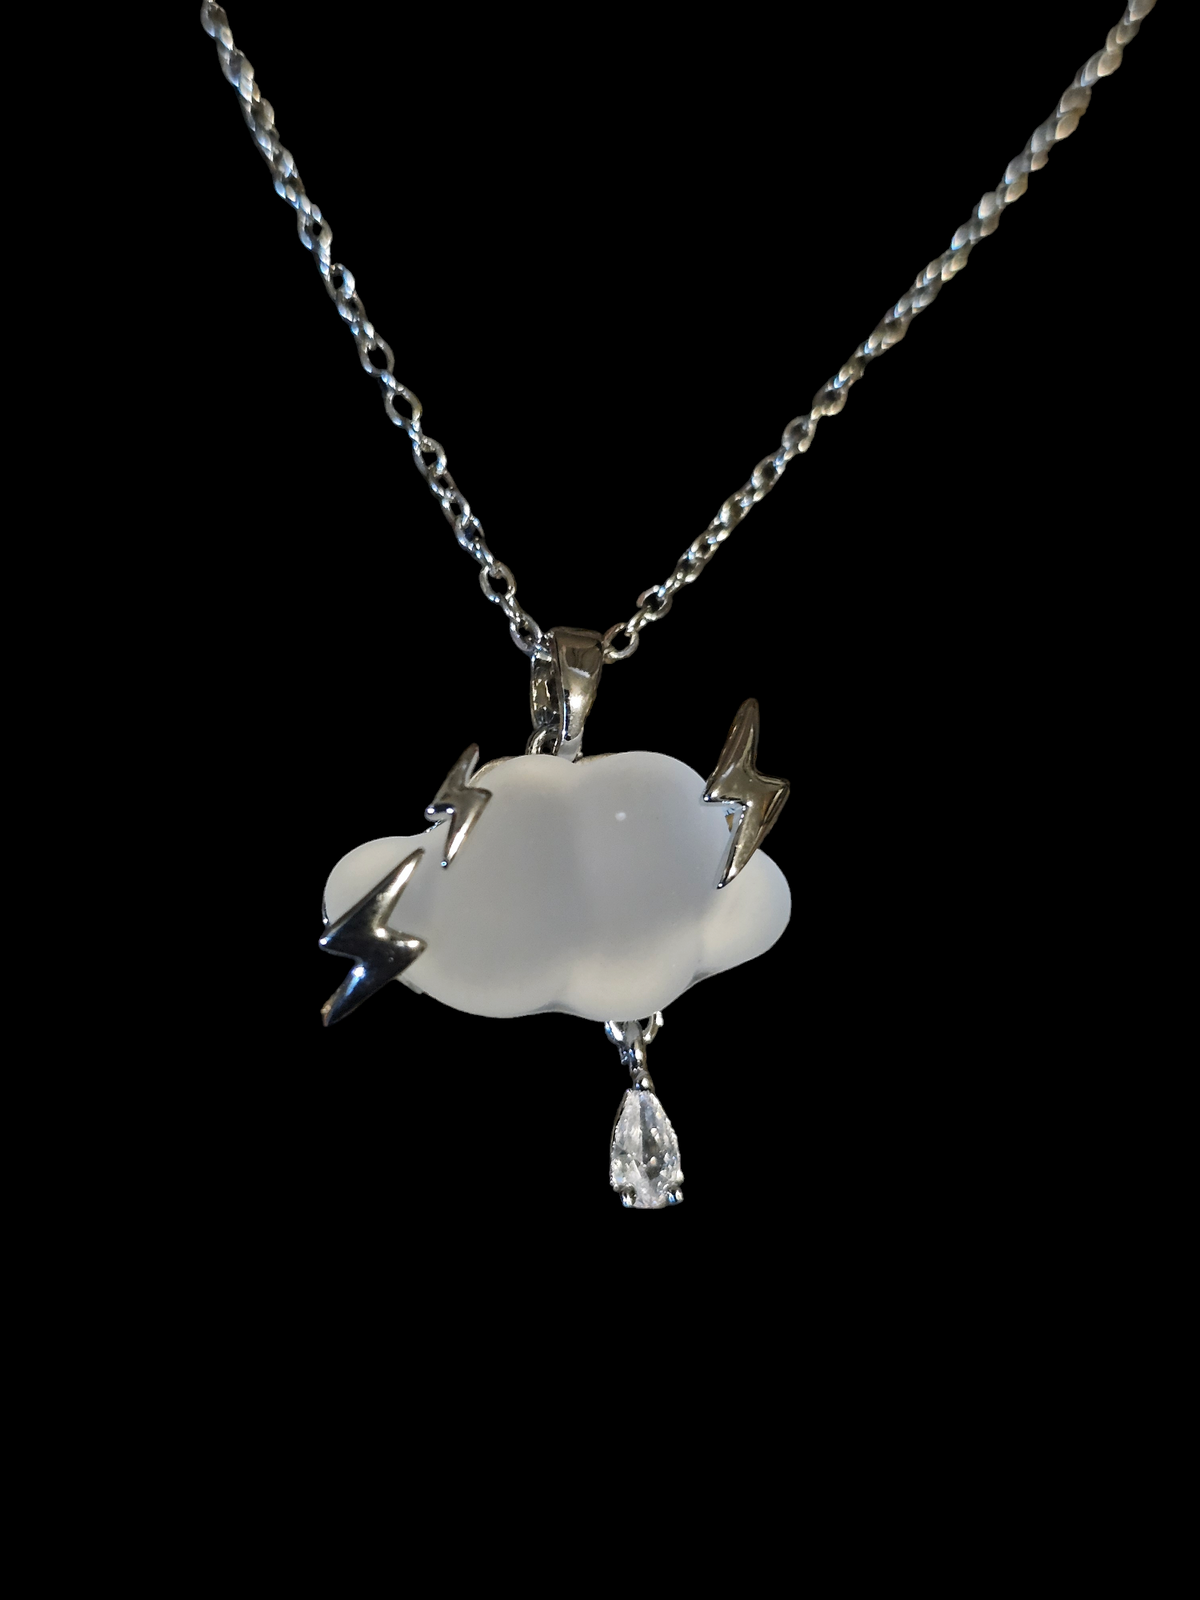 White Cloud" Pendant Necklace - Stainless Silver with Resin Cloud and Zircon Raindrop